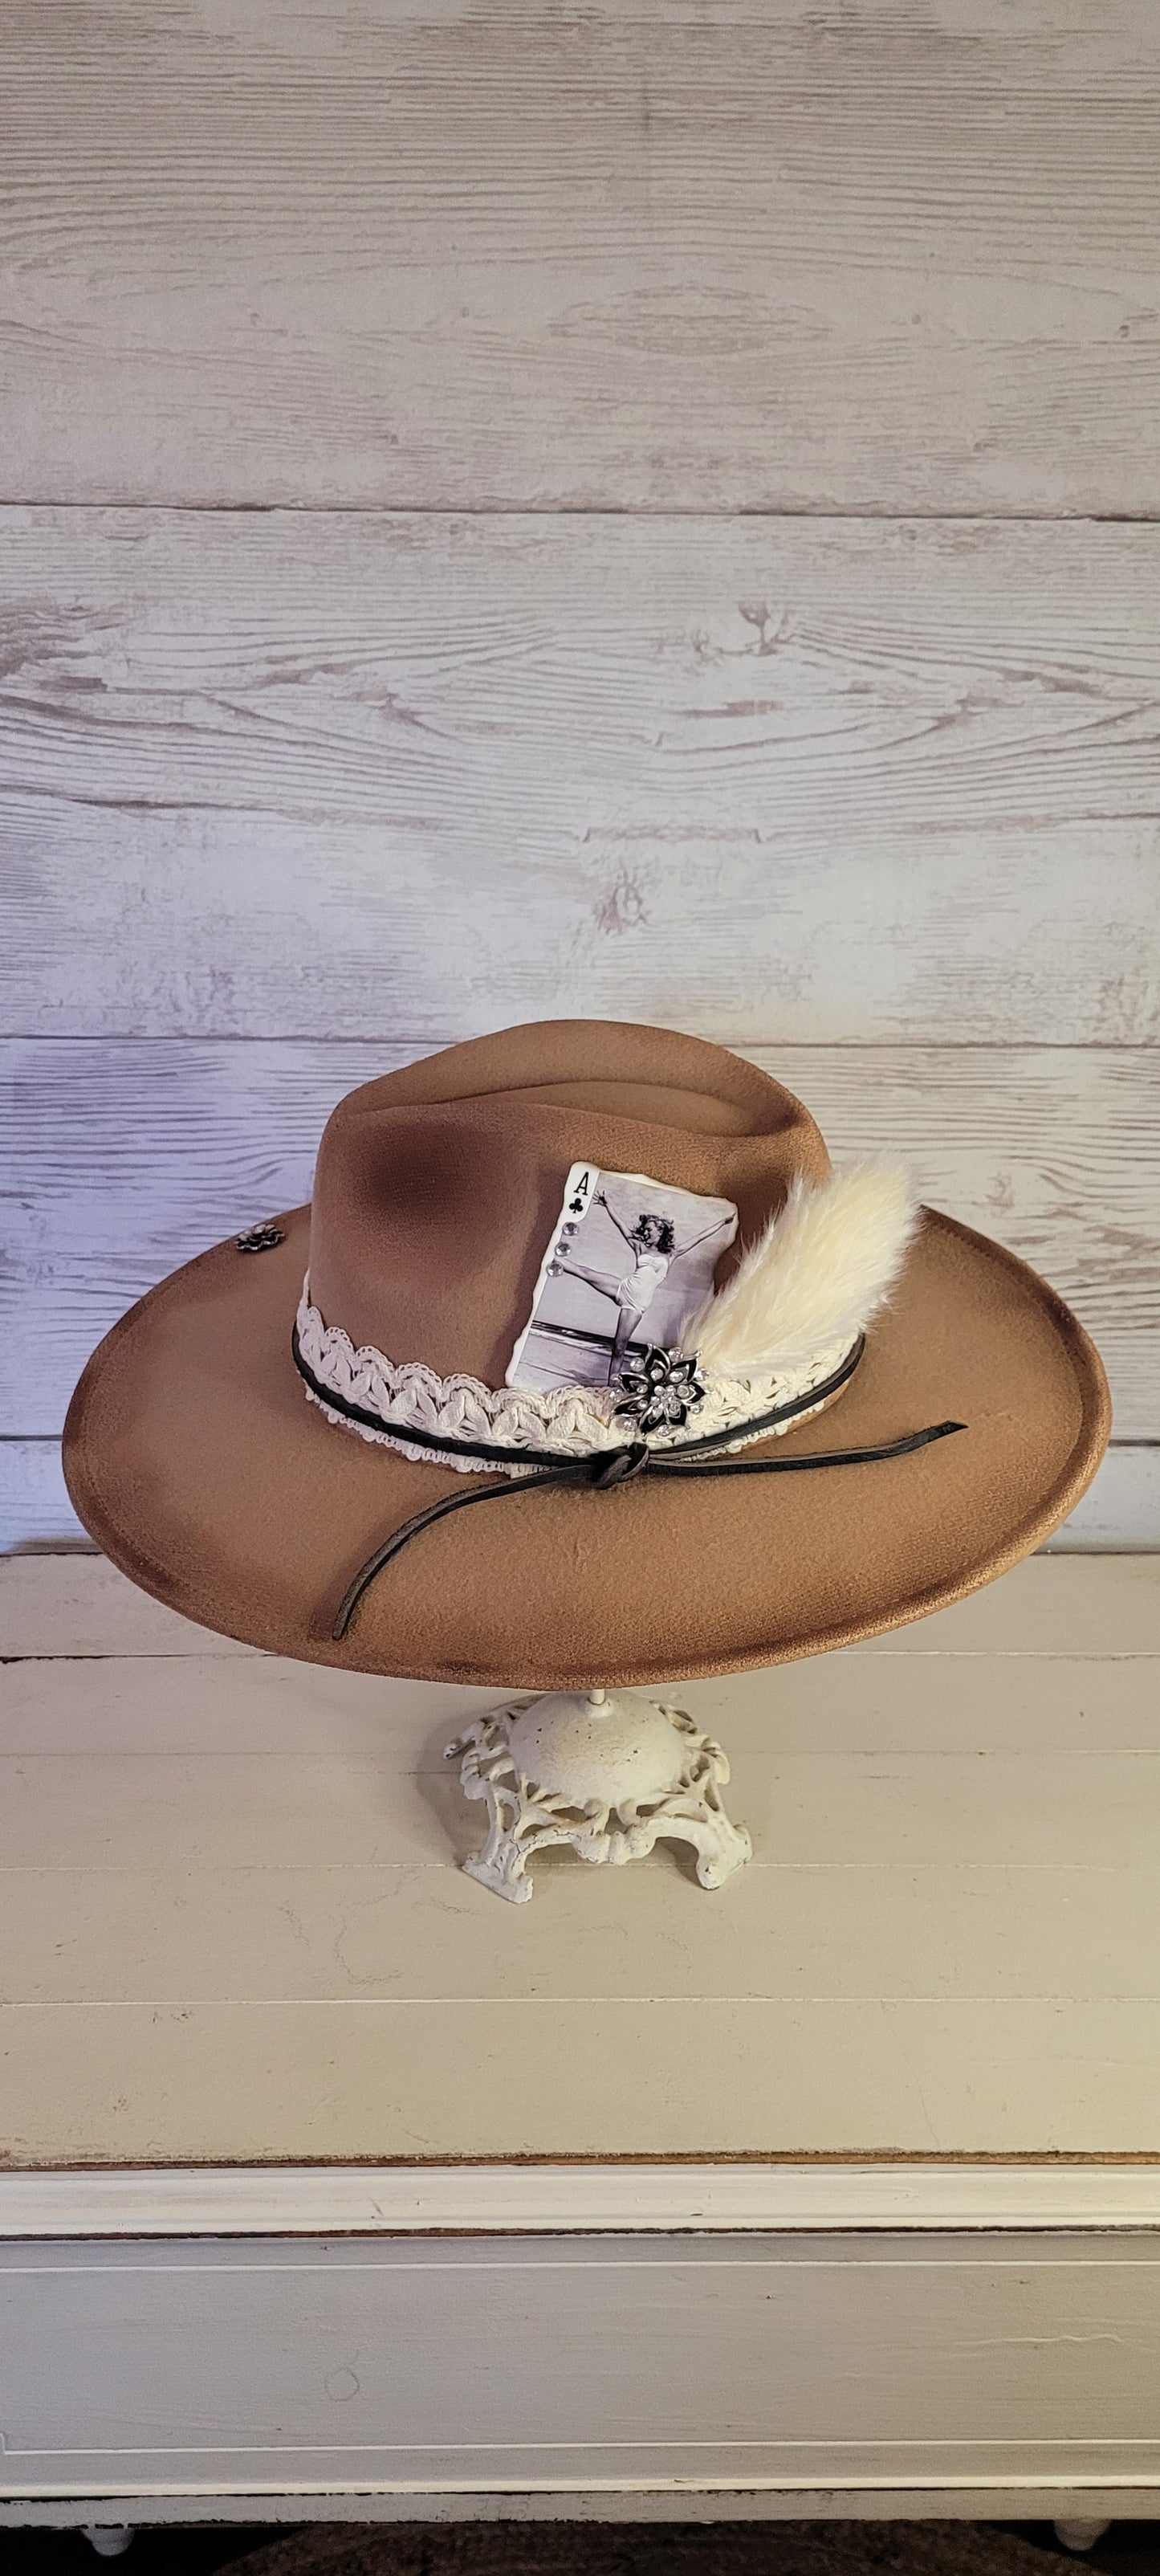 Features "I'm acting up" engraving Lace ribbon, leather band, pampas, rhinestone brooches, playing card Felt hat Flat brim 100% polyester Ribbon drawstring for hat size adjustment Head Circumference: 24" Crown Height: 5" Brim Length: 15.75" Brim Width: 14.5" Branded & numbered inside crown Custom burned & engraved by Kayla